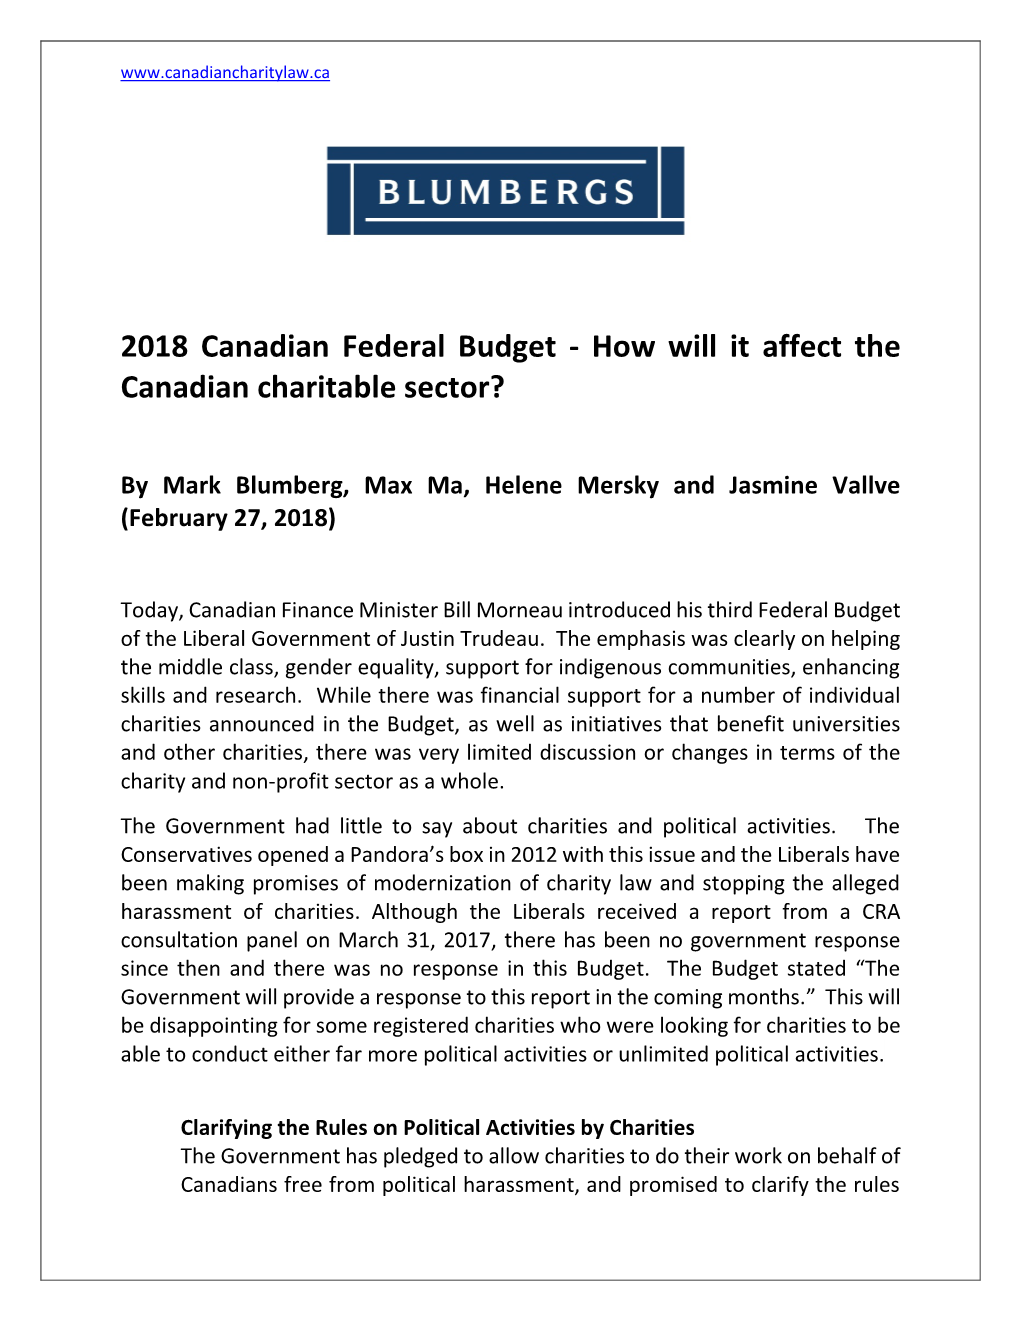 2018 Canadian Federal Budget - How Will It Affect the Canadian Charitable Sector?